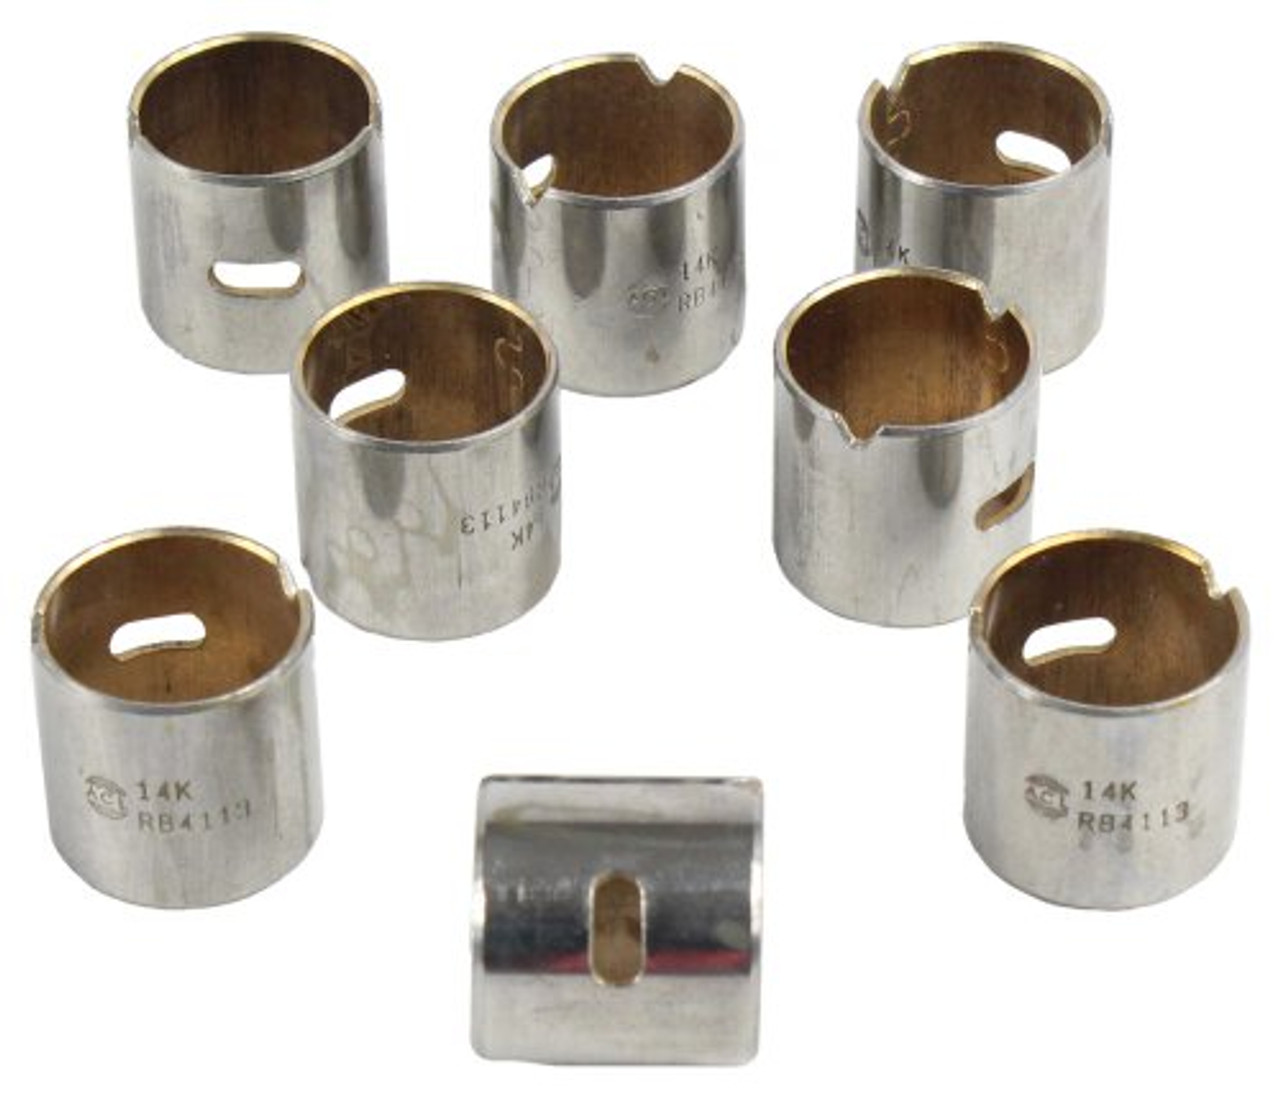 Piston Pin Bushings - 1999 Ford Expedition 5.4L Engine Parts # PB4131ZE127